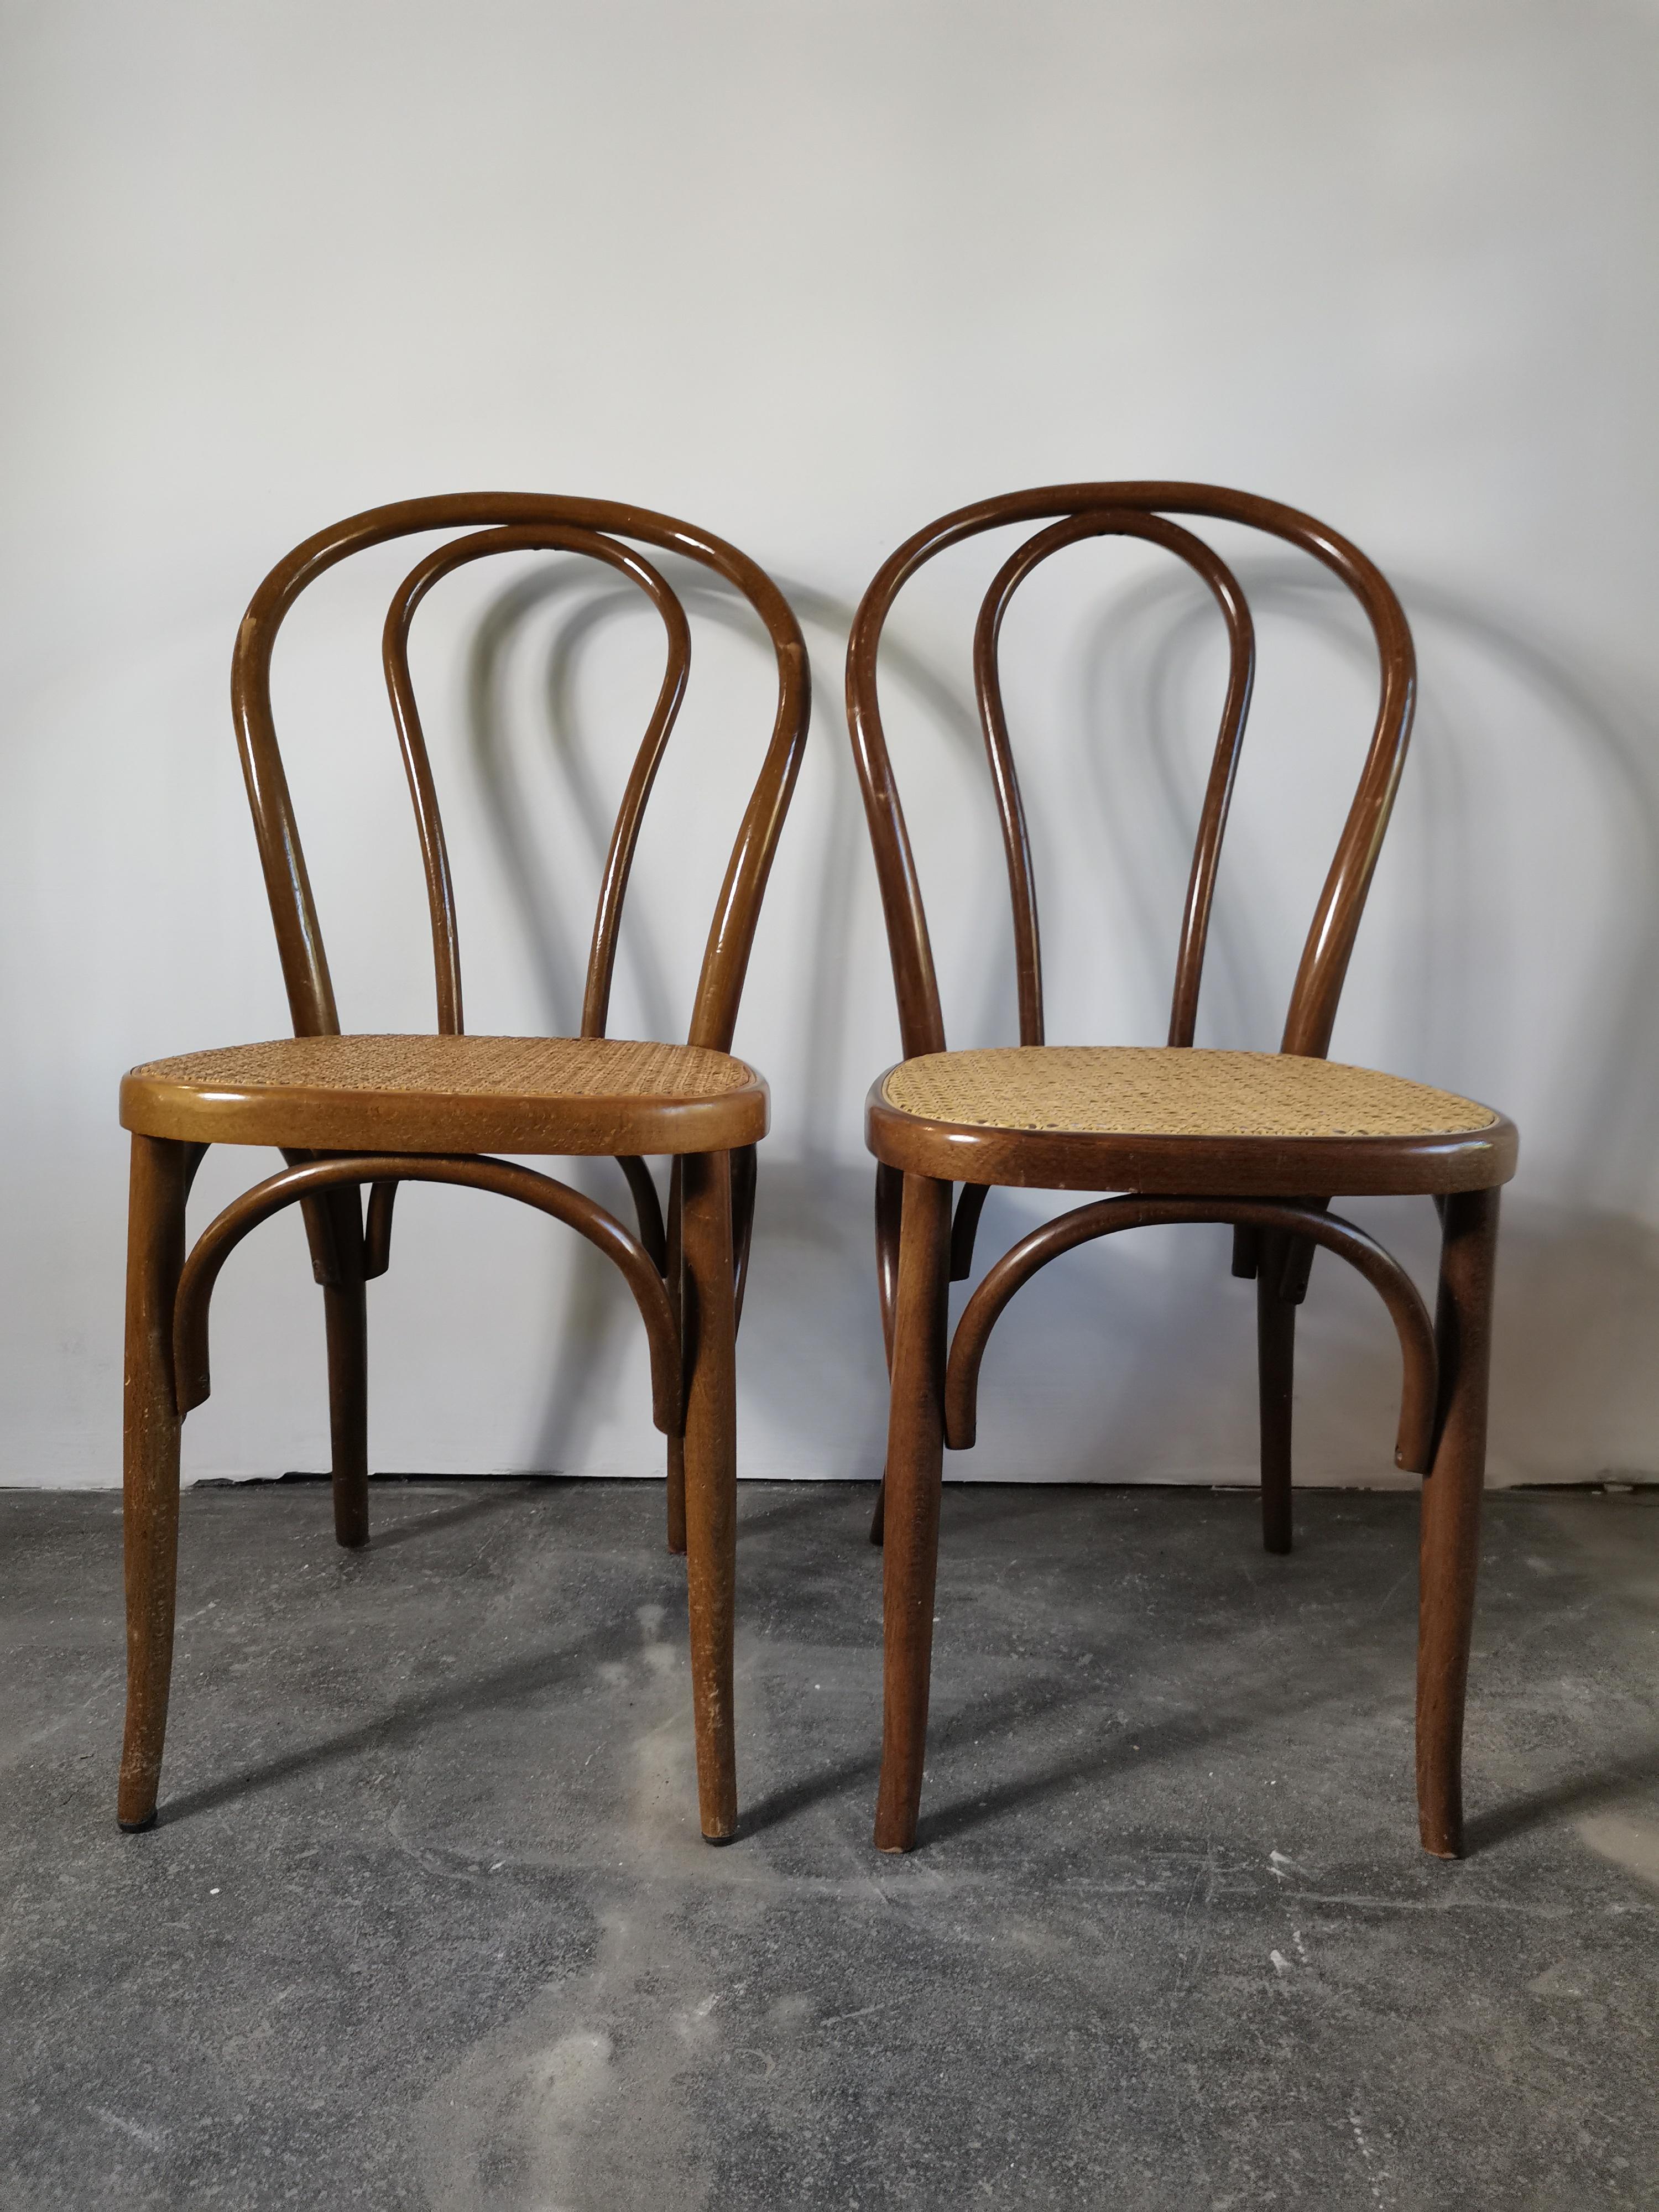 Cane Bentwood No. 18, 1960s 1 of 2 For Sale